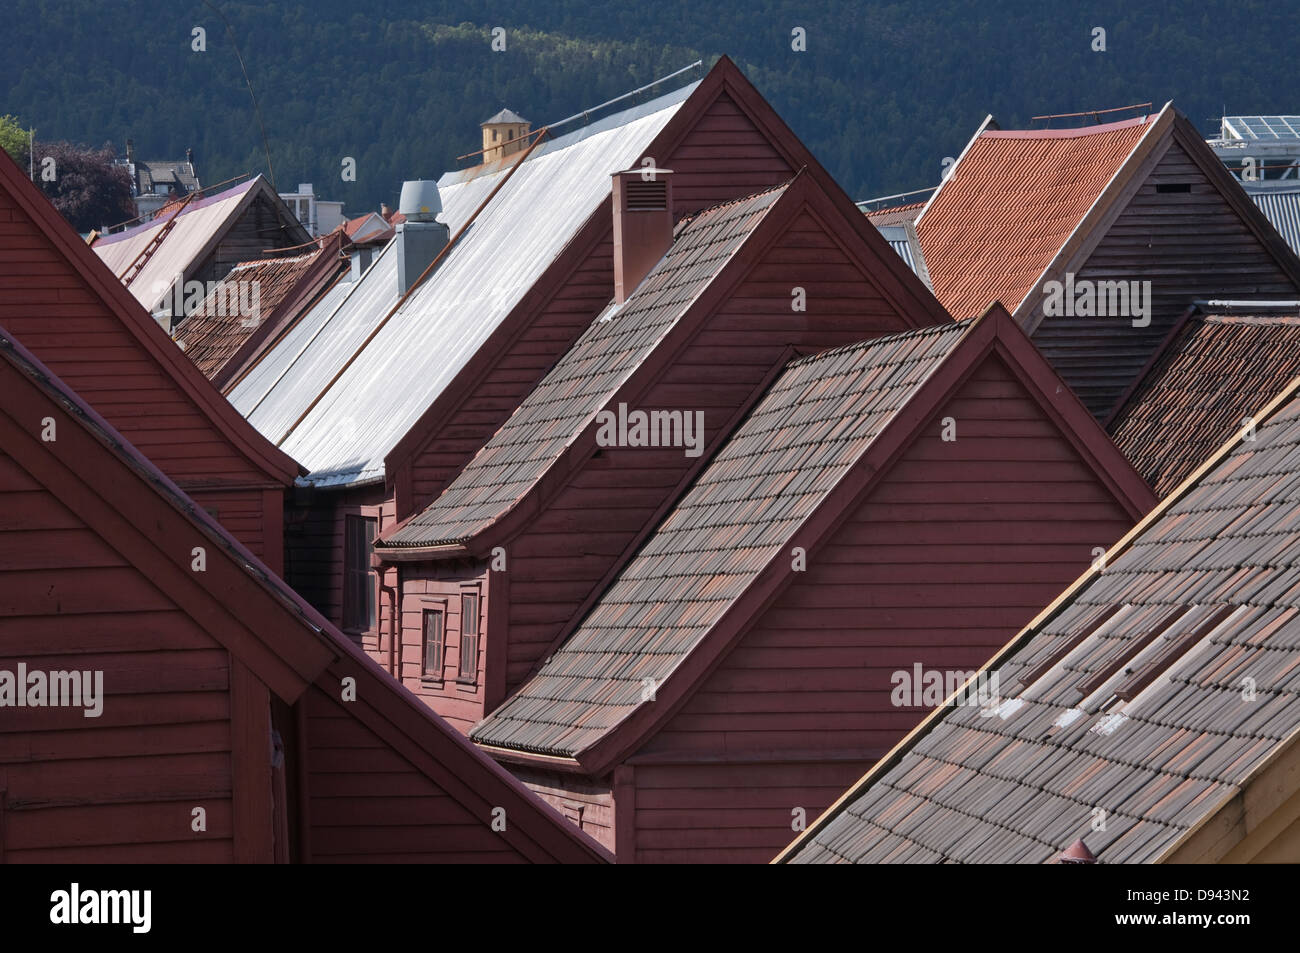 Tiled roofs in old Scandinavian town Stock Photo